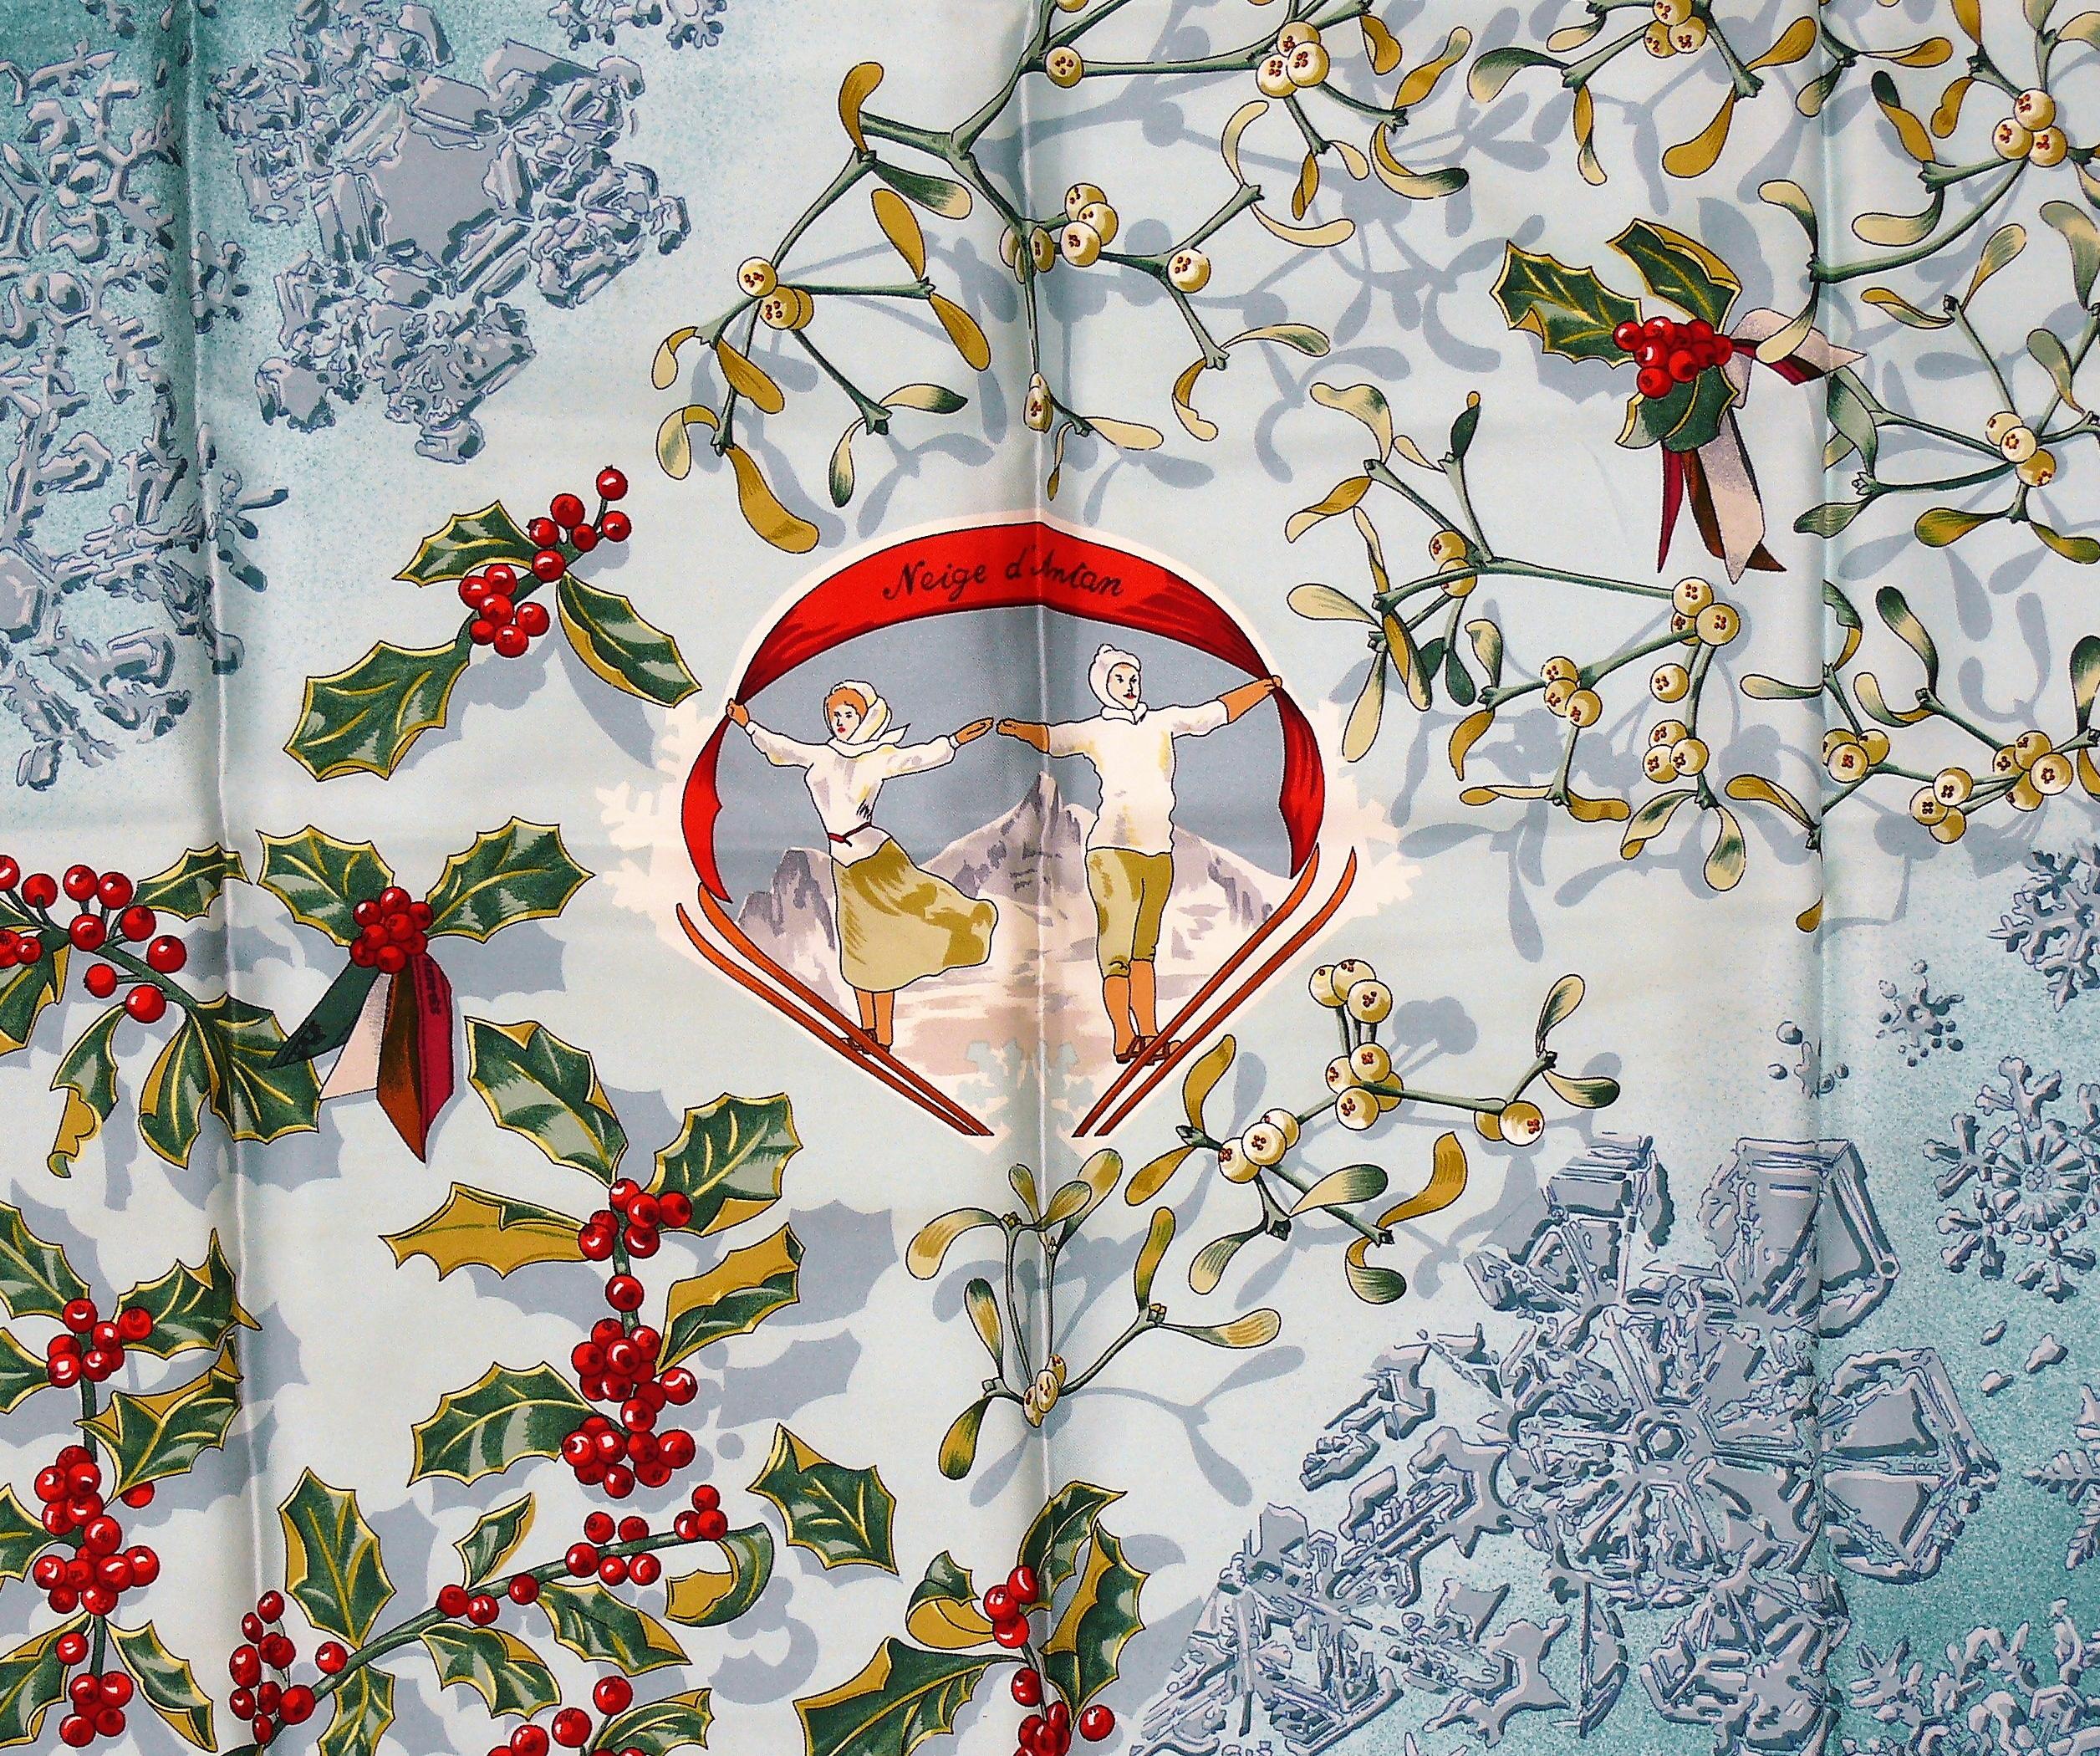 HERMES vintage silk carré scarf NEIGE D'ANTAN featuring a gorgeous winter theme.

Original issue of 1989.

Designed by CATY LATHAM.

This scarf features :
- Hand rolled borders.
- Plump hems.
- 100 % silk.

Marked HERMES PARIS ©.
Please note that